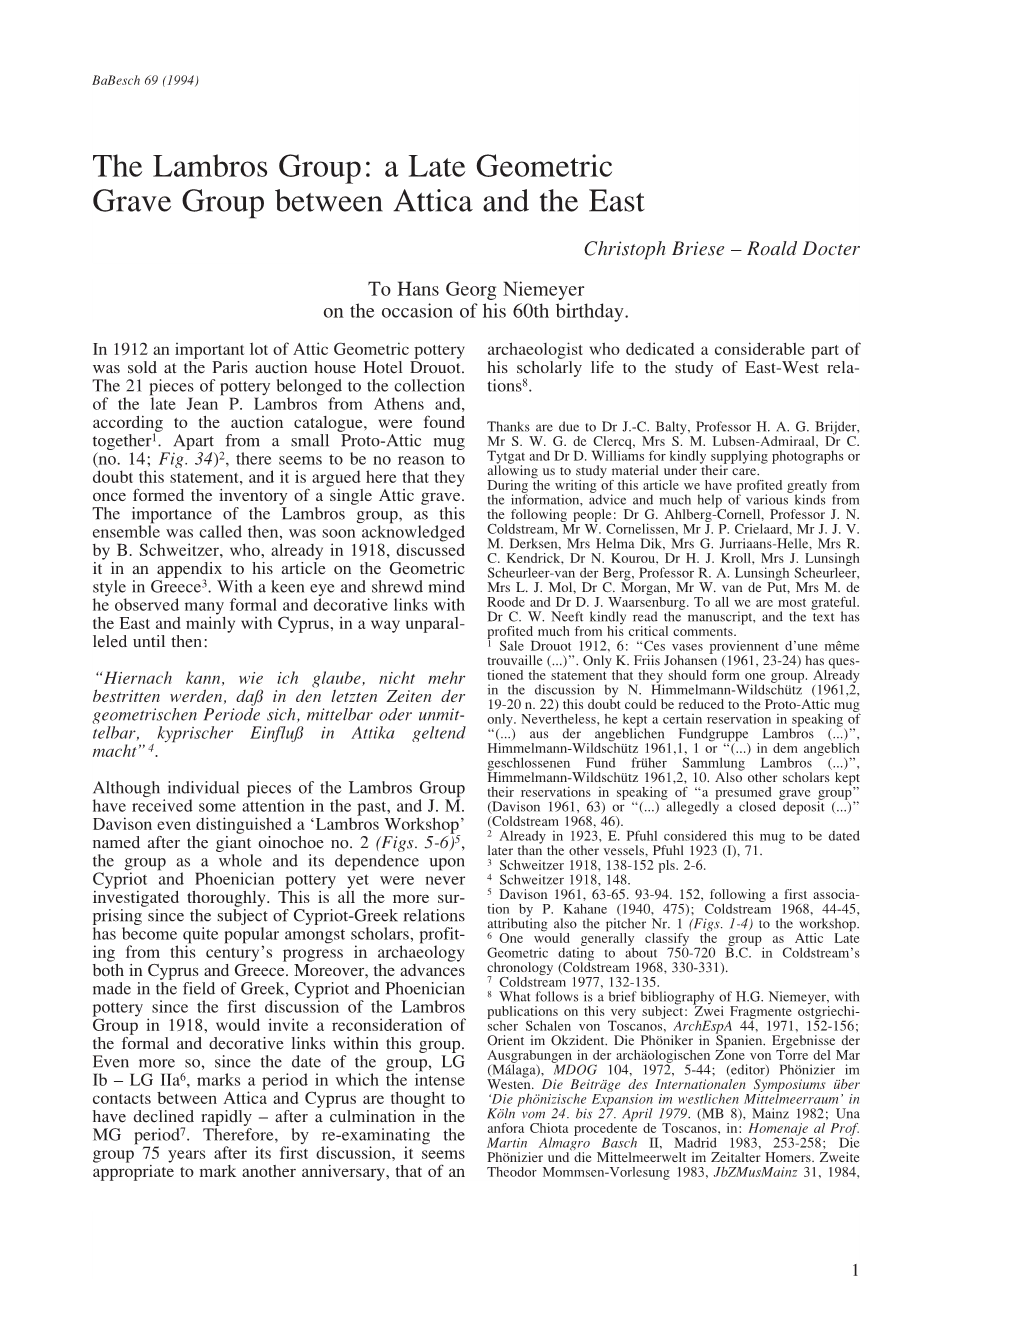 The Lambros Group: a Late Geometric Grave Group Between Attica and the East